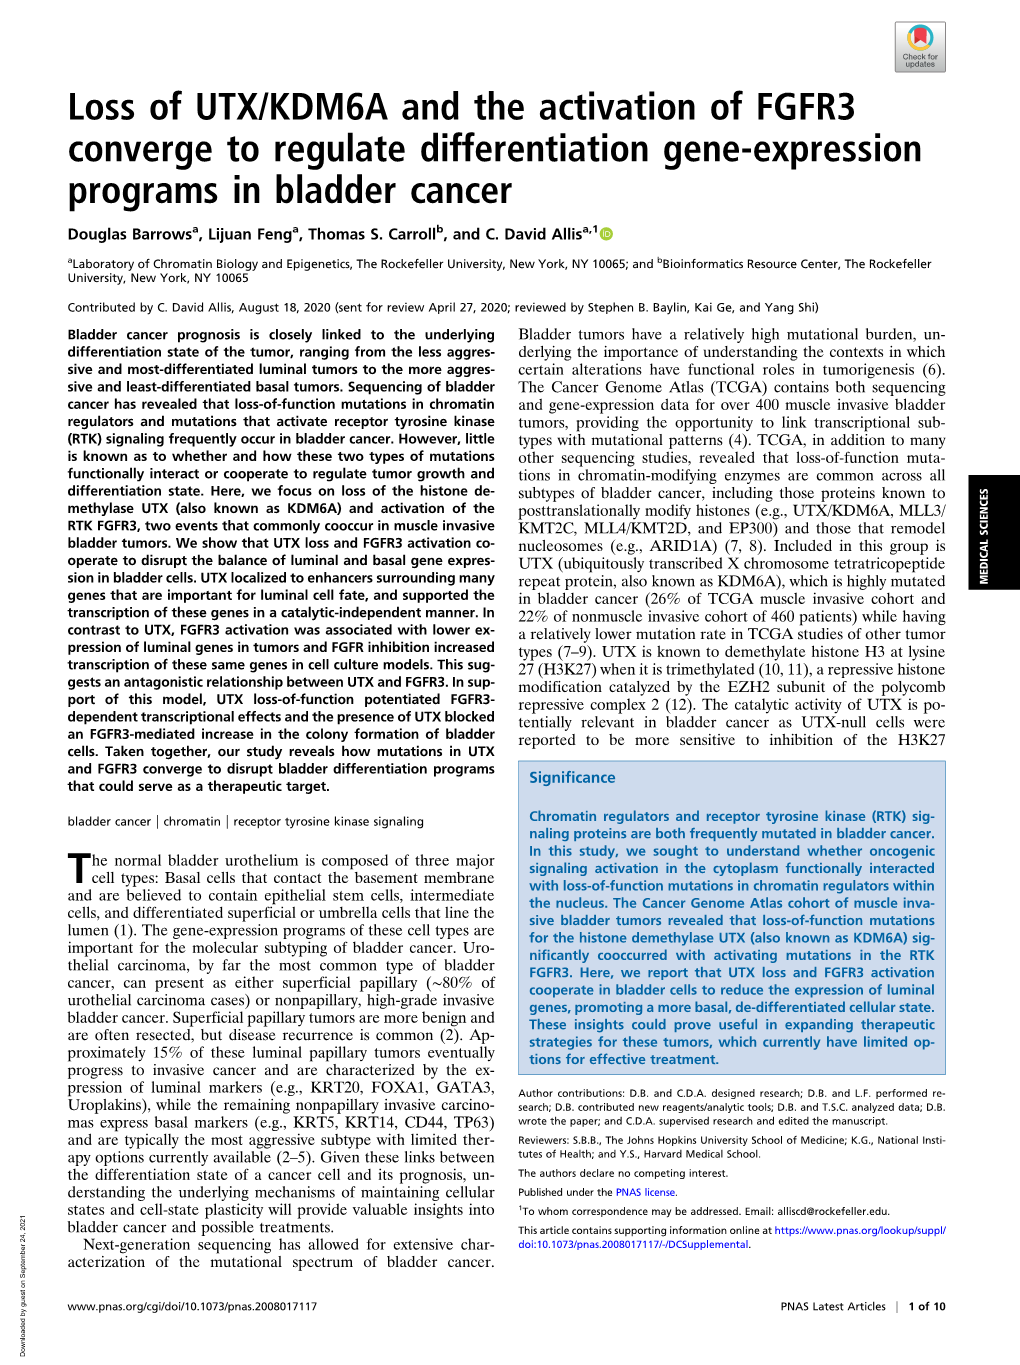 Loss of UTX/KDM6A and the Activation of FGFR3 Converge to Regulate Differentiation Gene-Expression Programs in Bladder Cancer